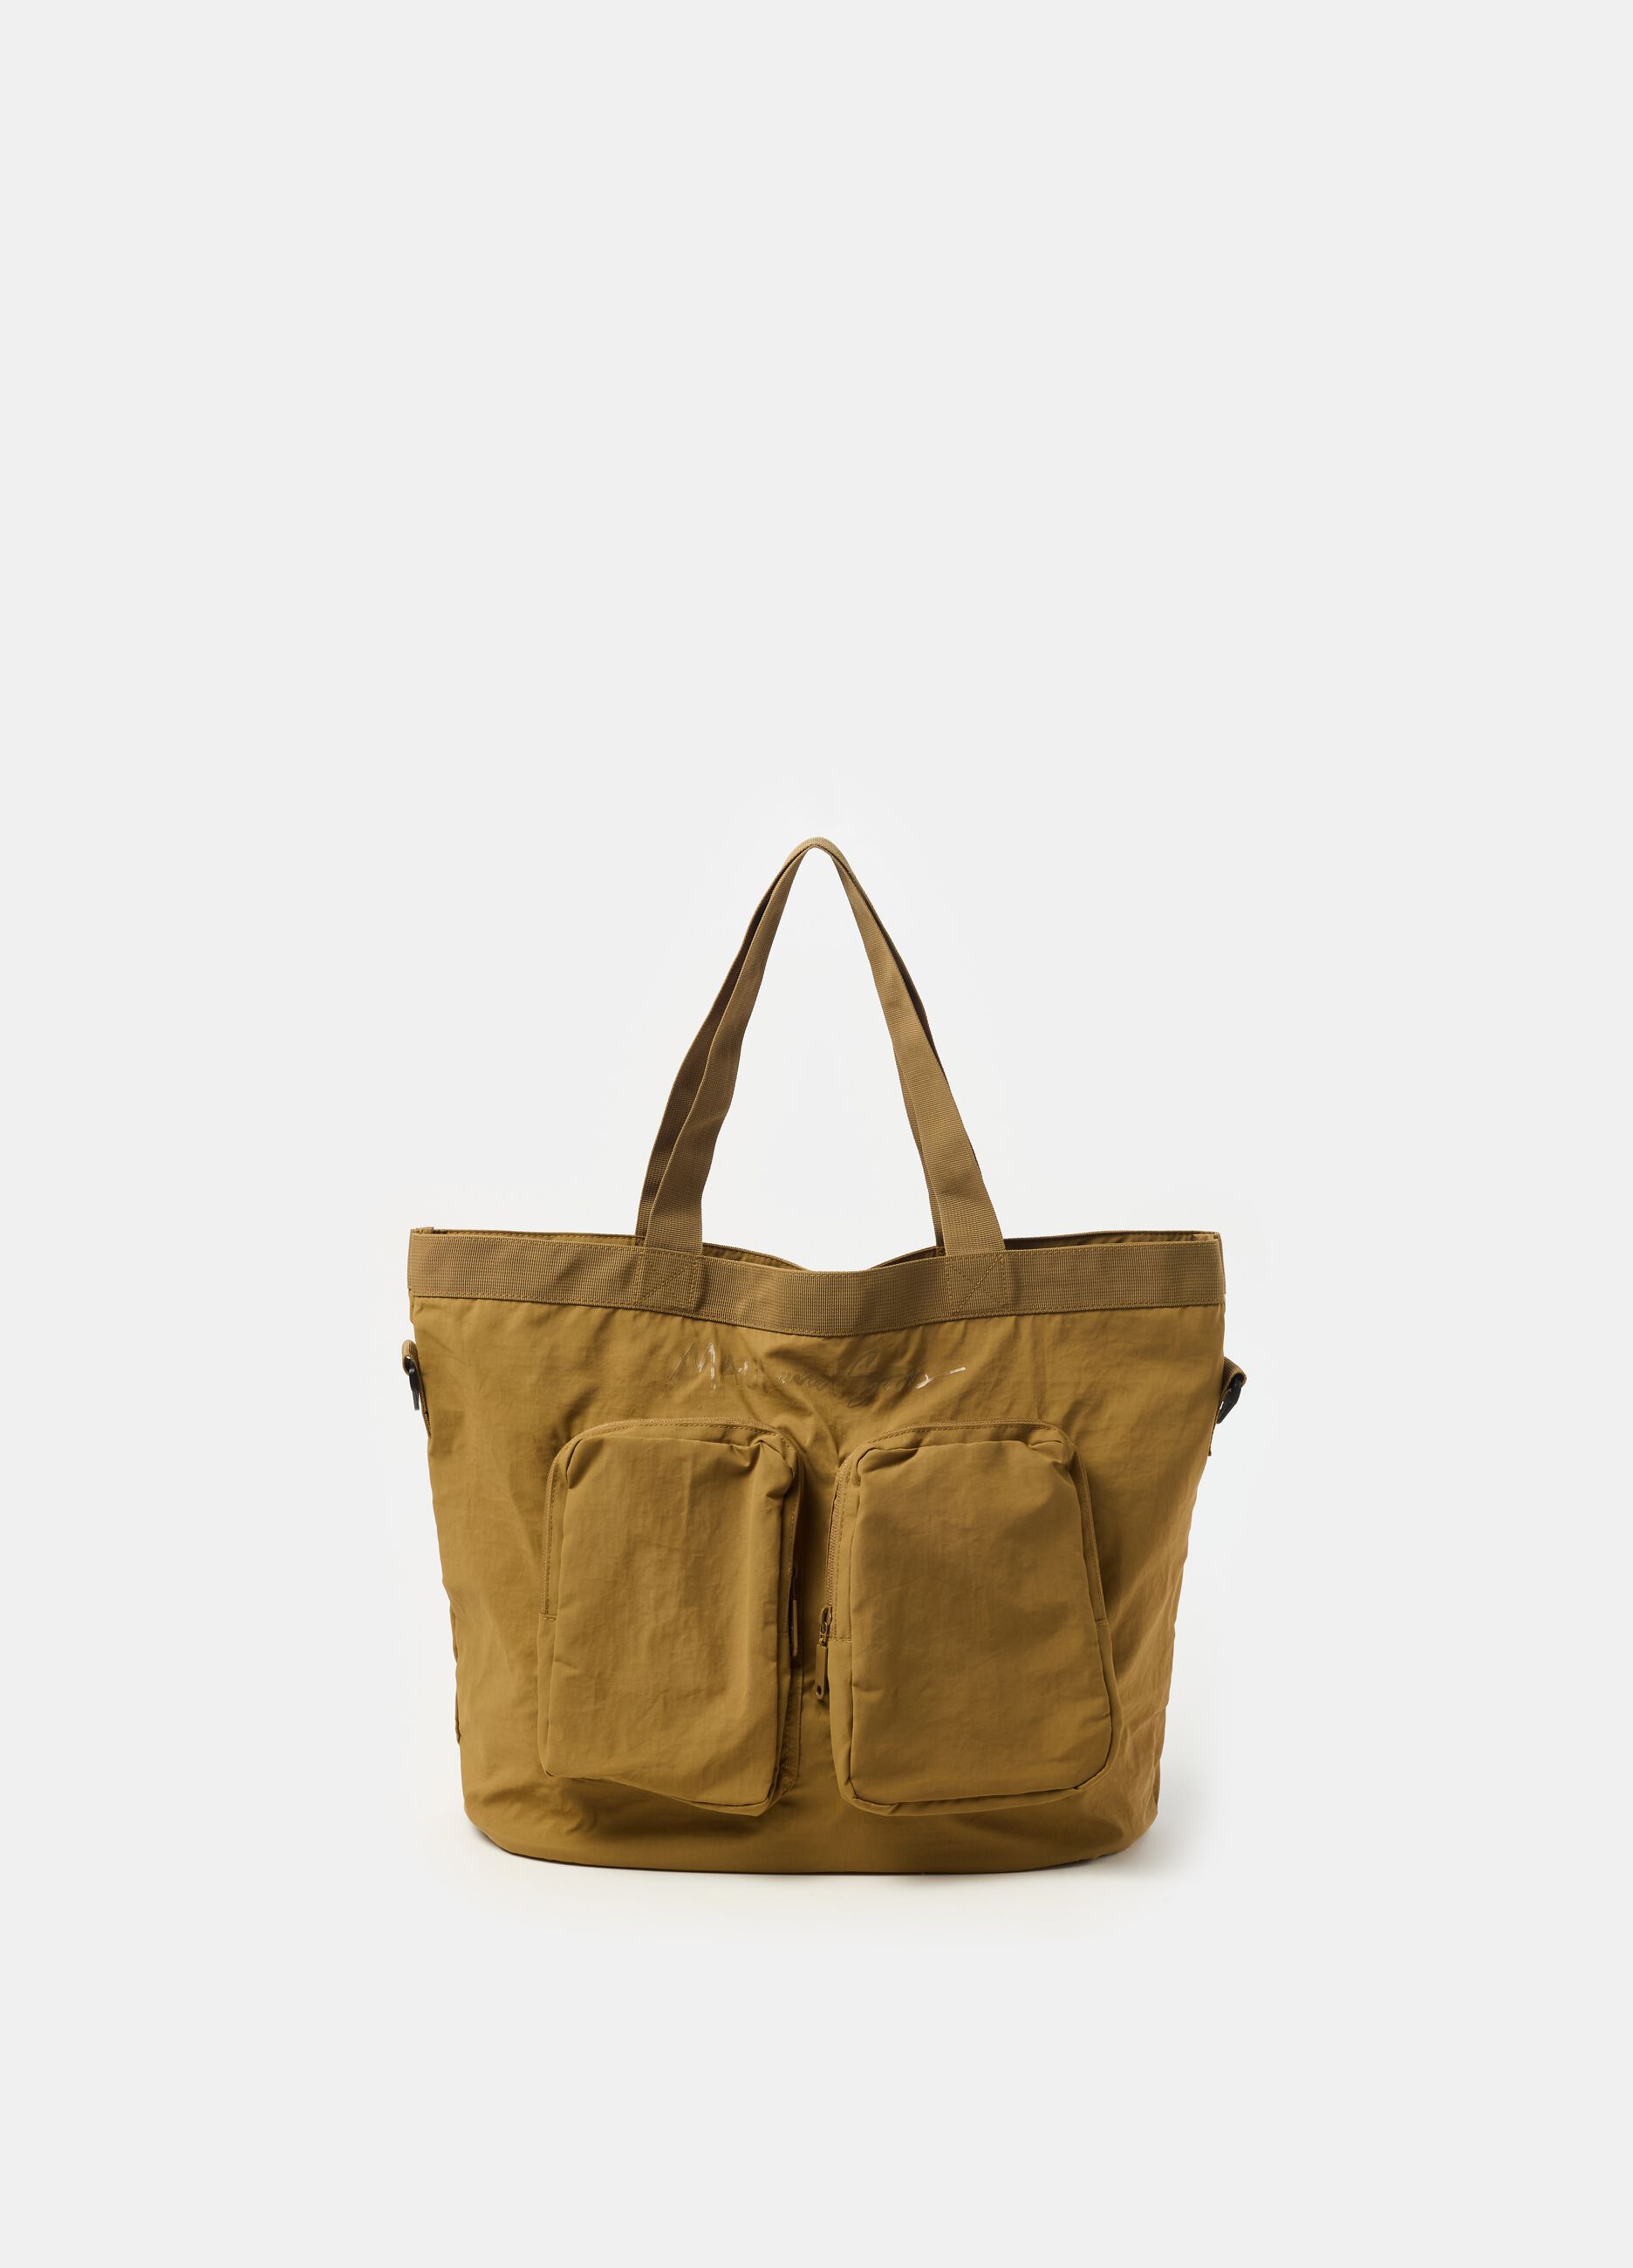 Shopping bag with pockets